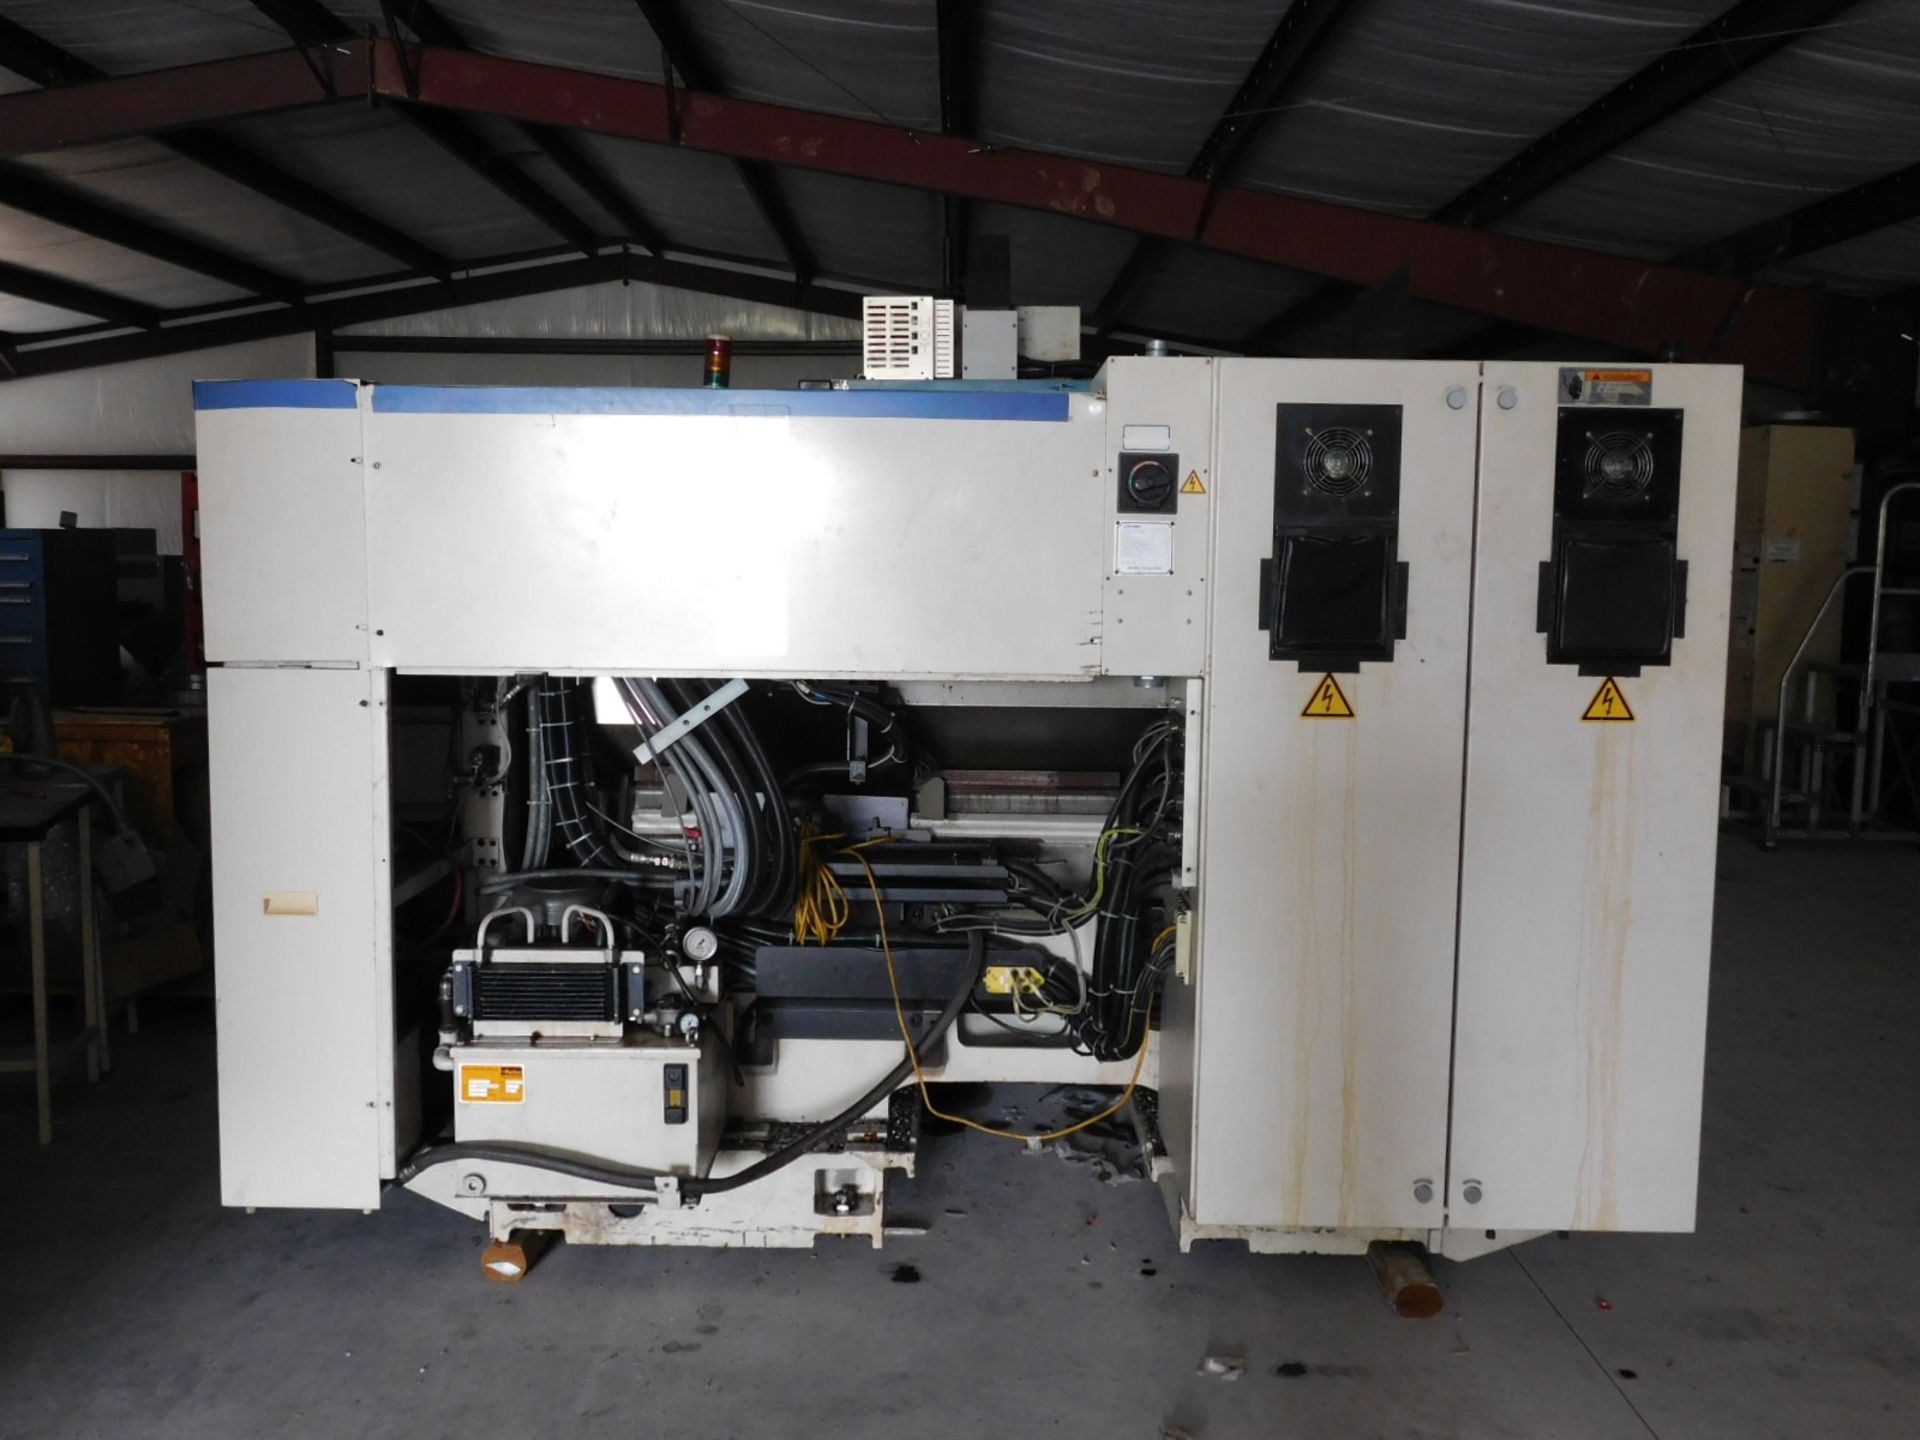 OKUMA CAPTAIN -L370 MW CNC TURNING CENTER, OPS-E100L CNC CONTROL, MAX SWING OVER BED: 20.08", - Image 8 of 9